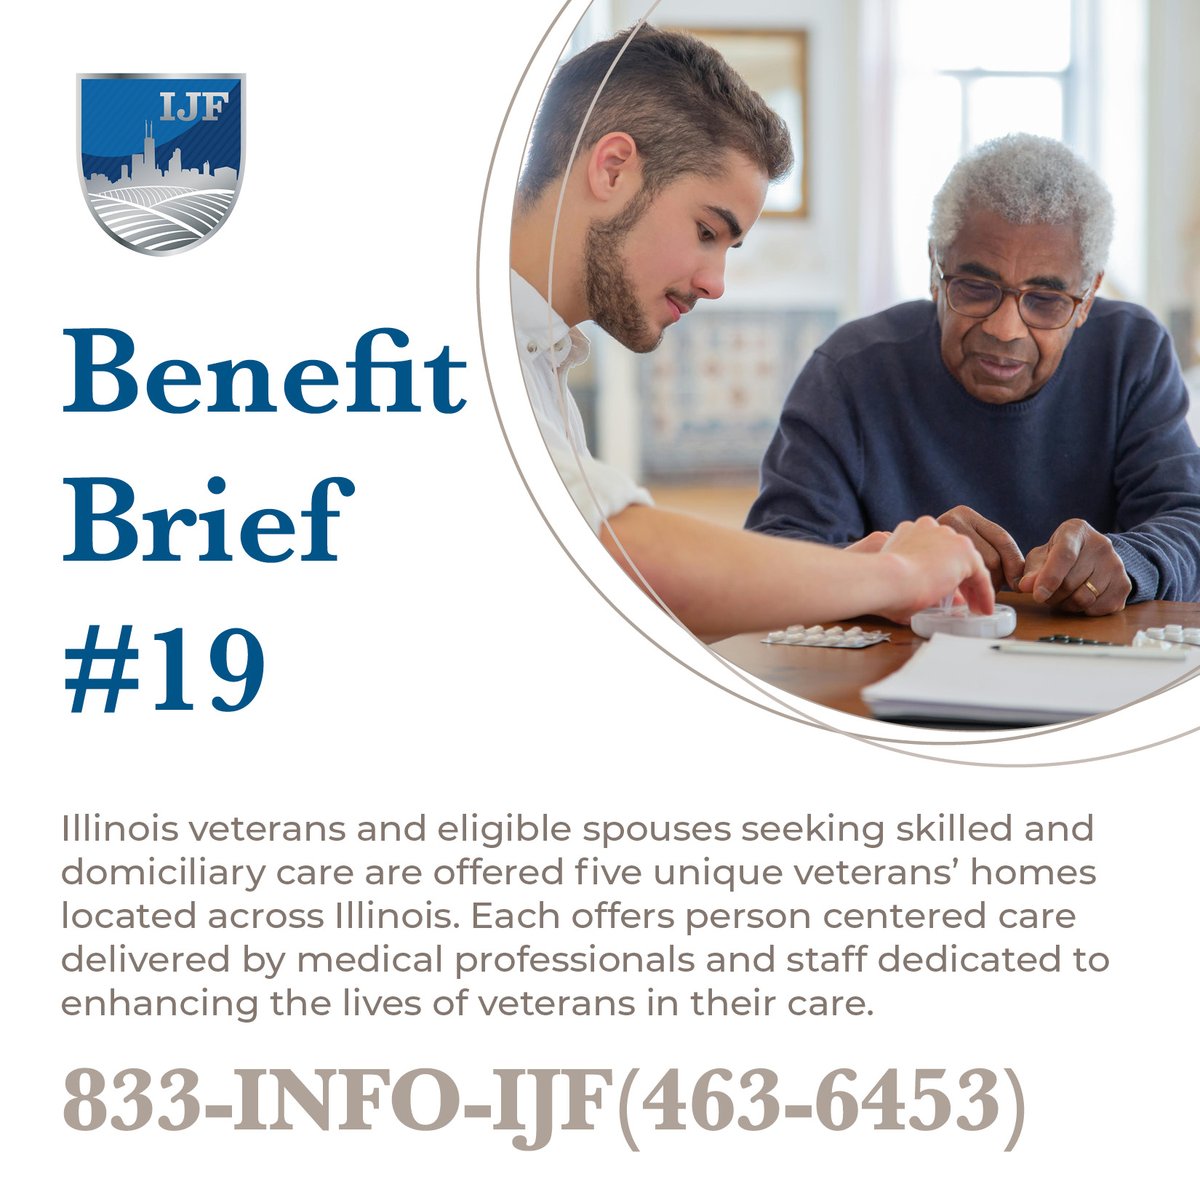 Benefit Brief #19: IDVA offers IL veterans & eligible spouses unique veterans’ homes across Illinois. Each offers person-centered care delivered by medical professionals and staff. Learn more at veterans.illinois.gov/services-benef…

#benefitsbrief #operationconnectillinoiscares #833INFOIJF